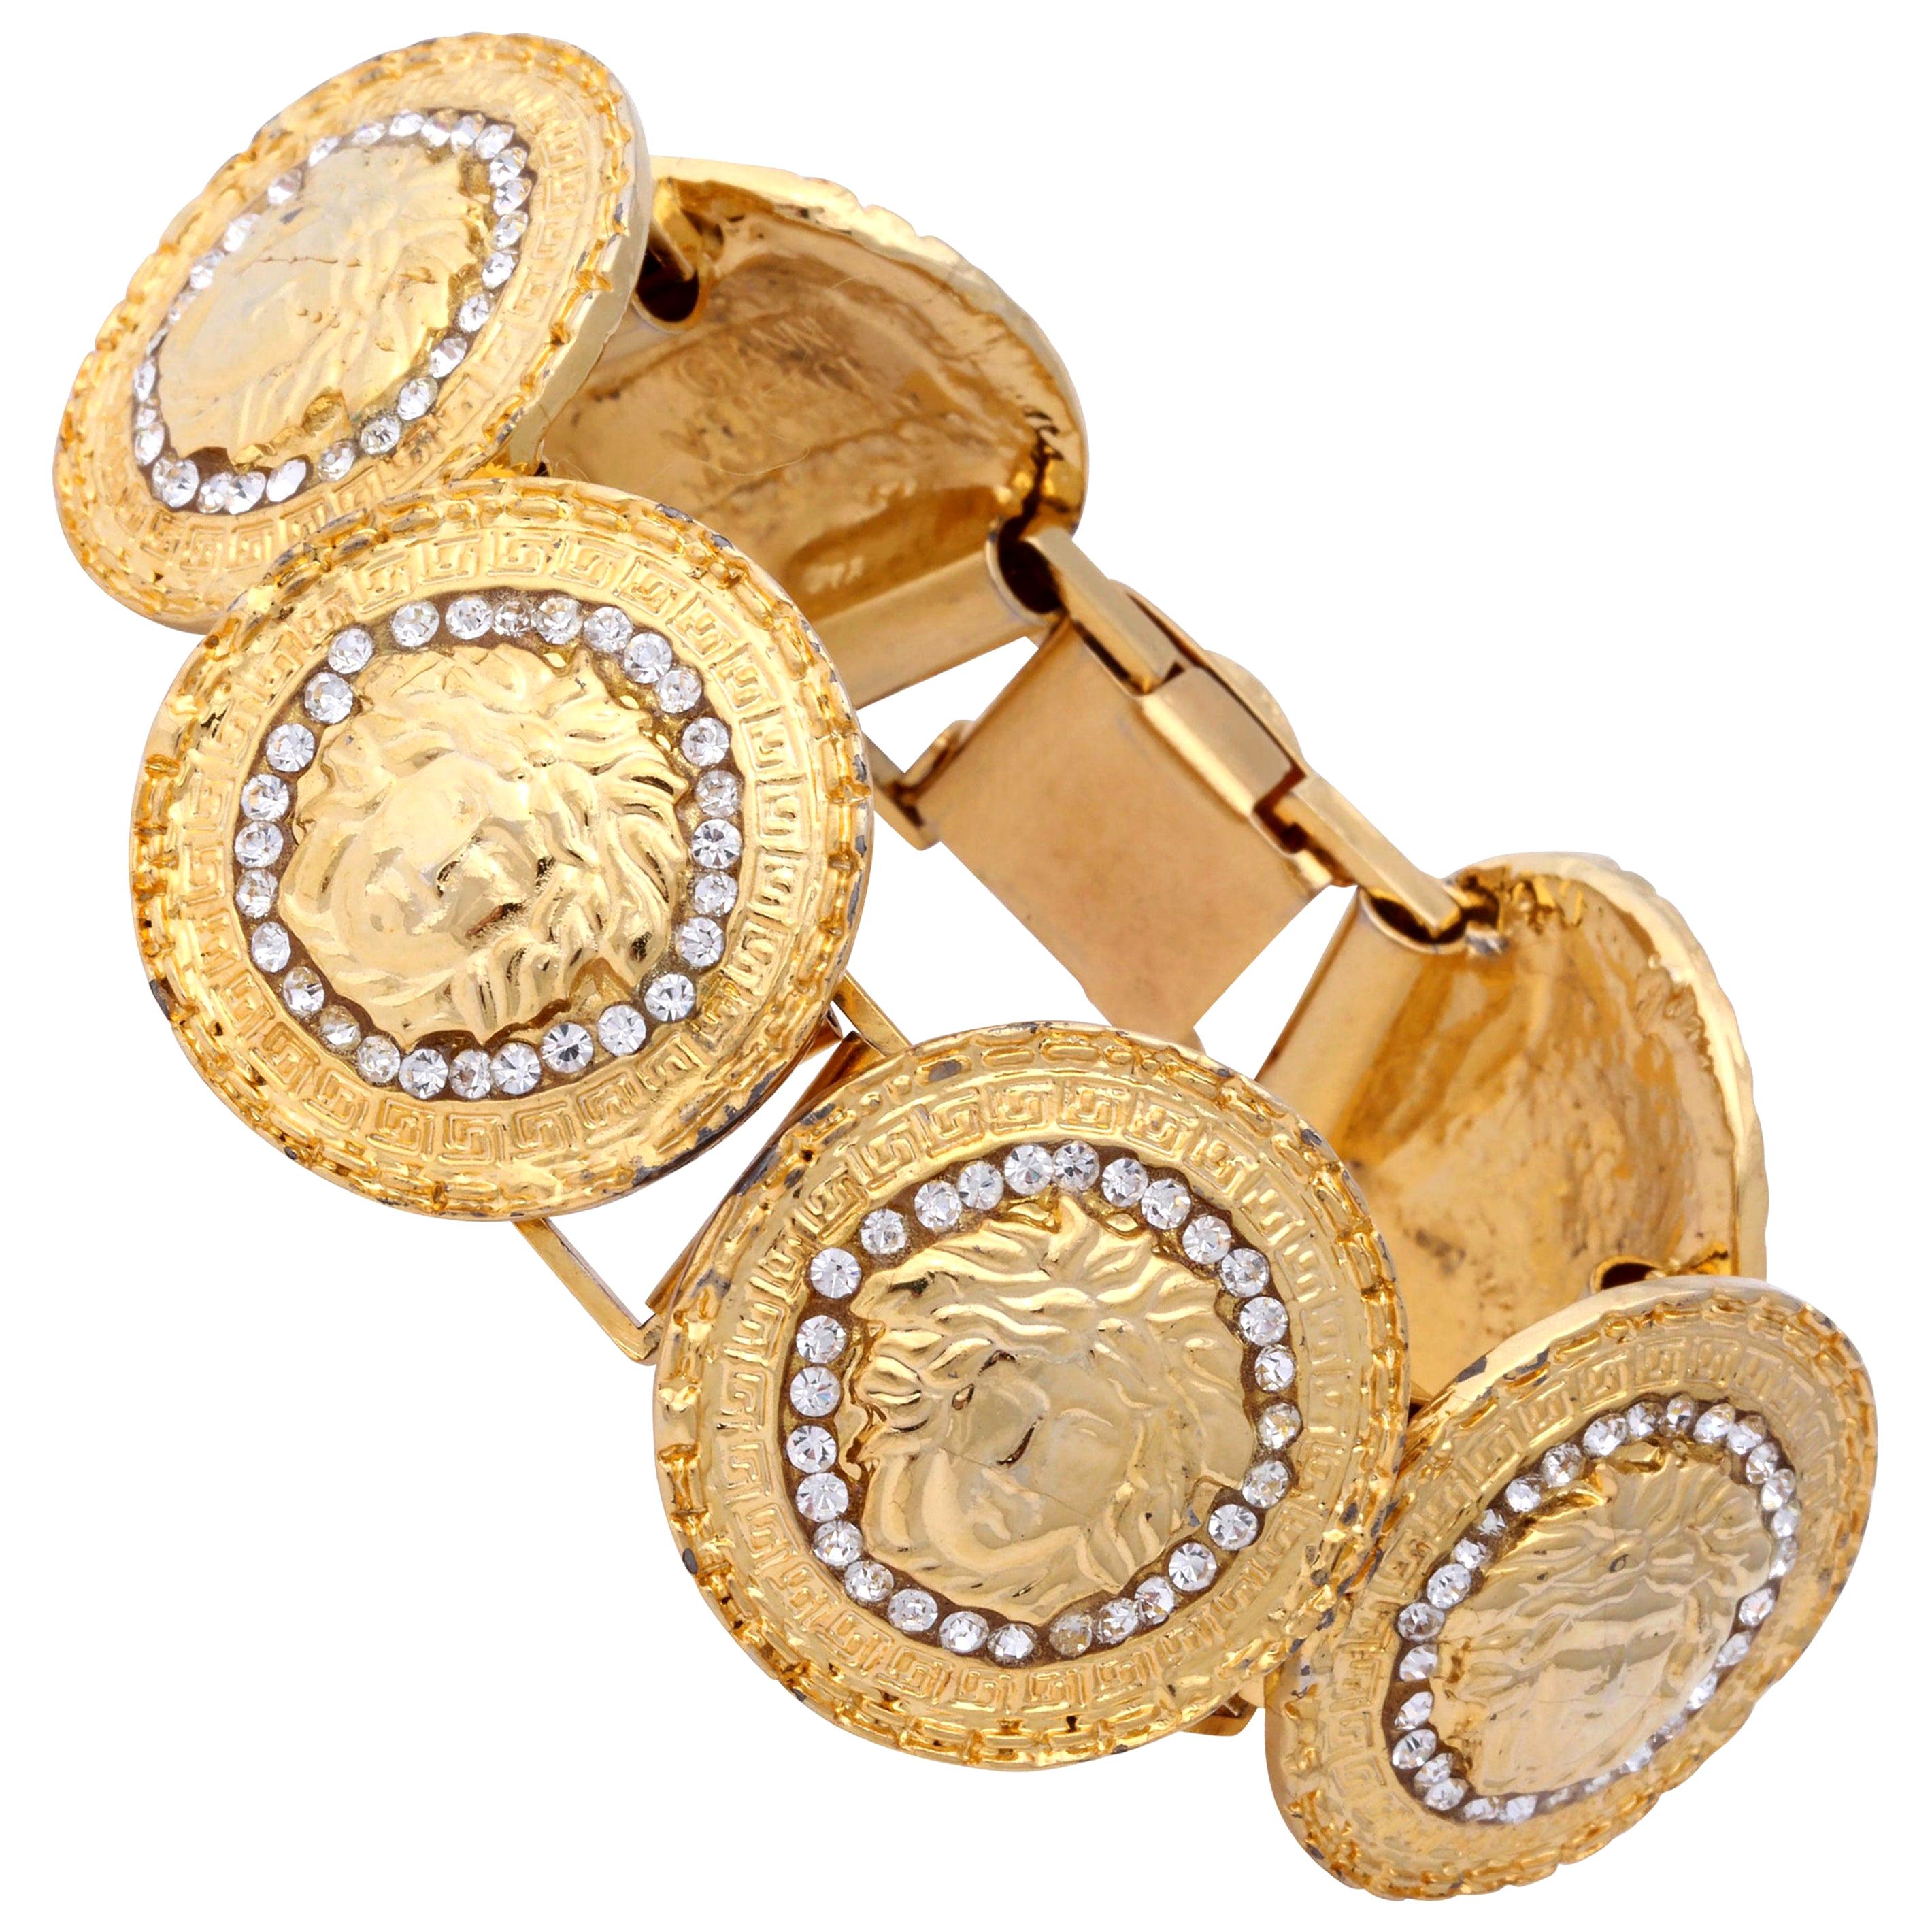 Gianni Versace Gold Toned Bracelet With 6 Medusas and Rhinestones For Sale